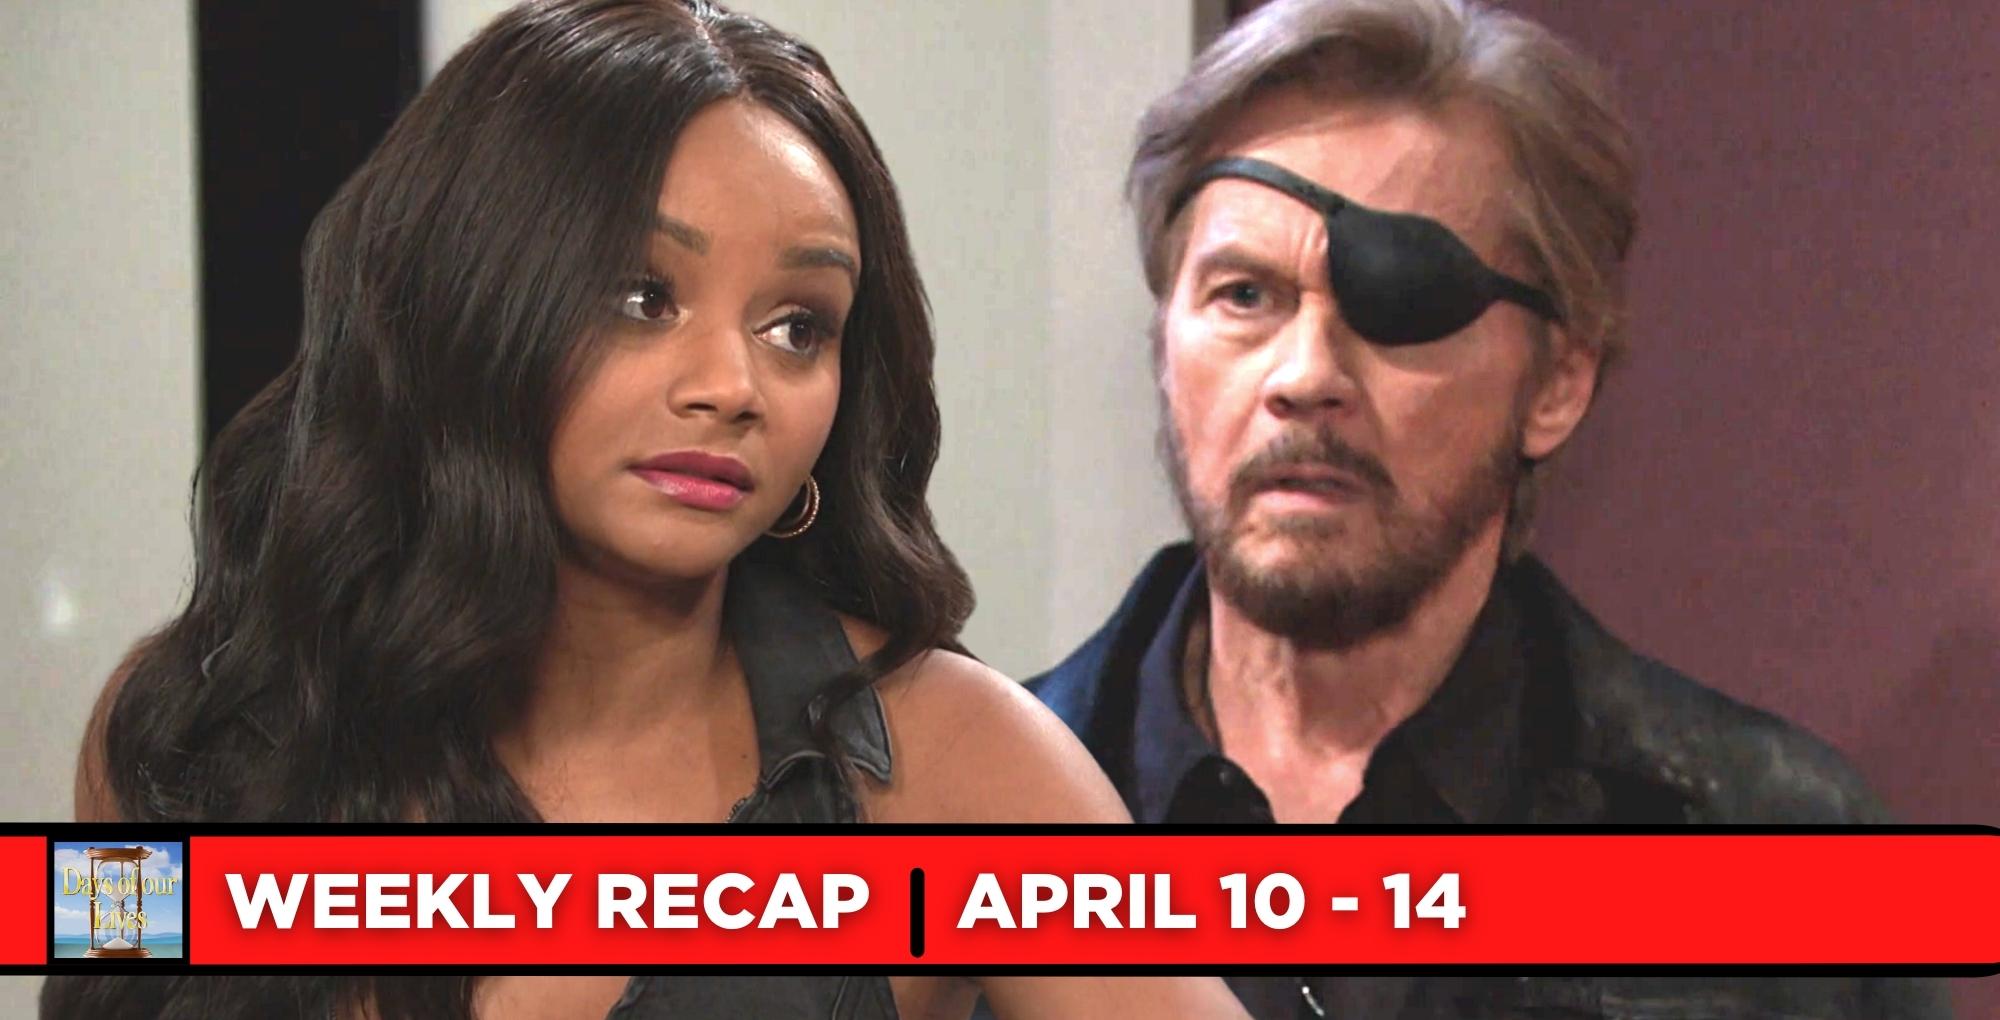 days of our lives recaps for april 10 - 14, 2023, two images chanel and steve